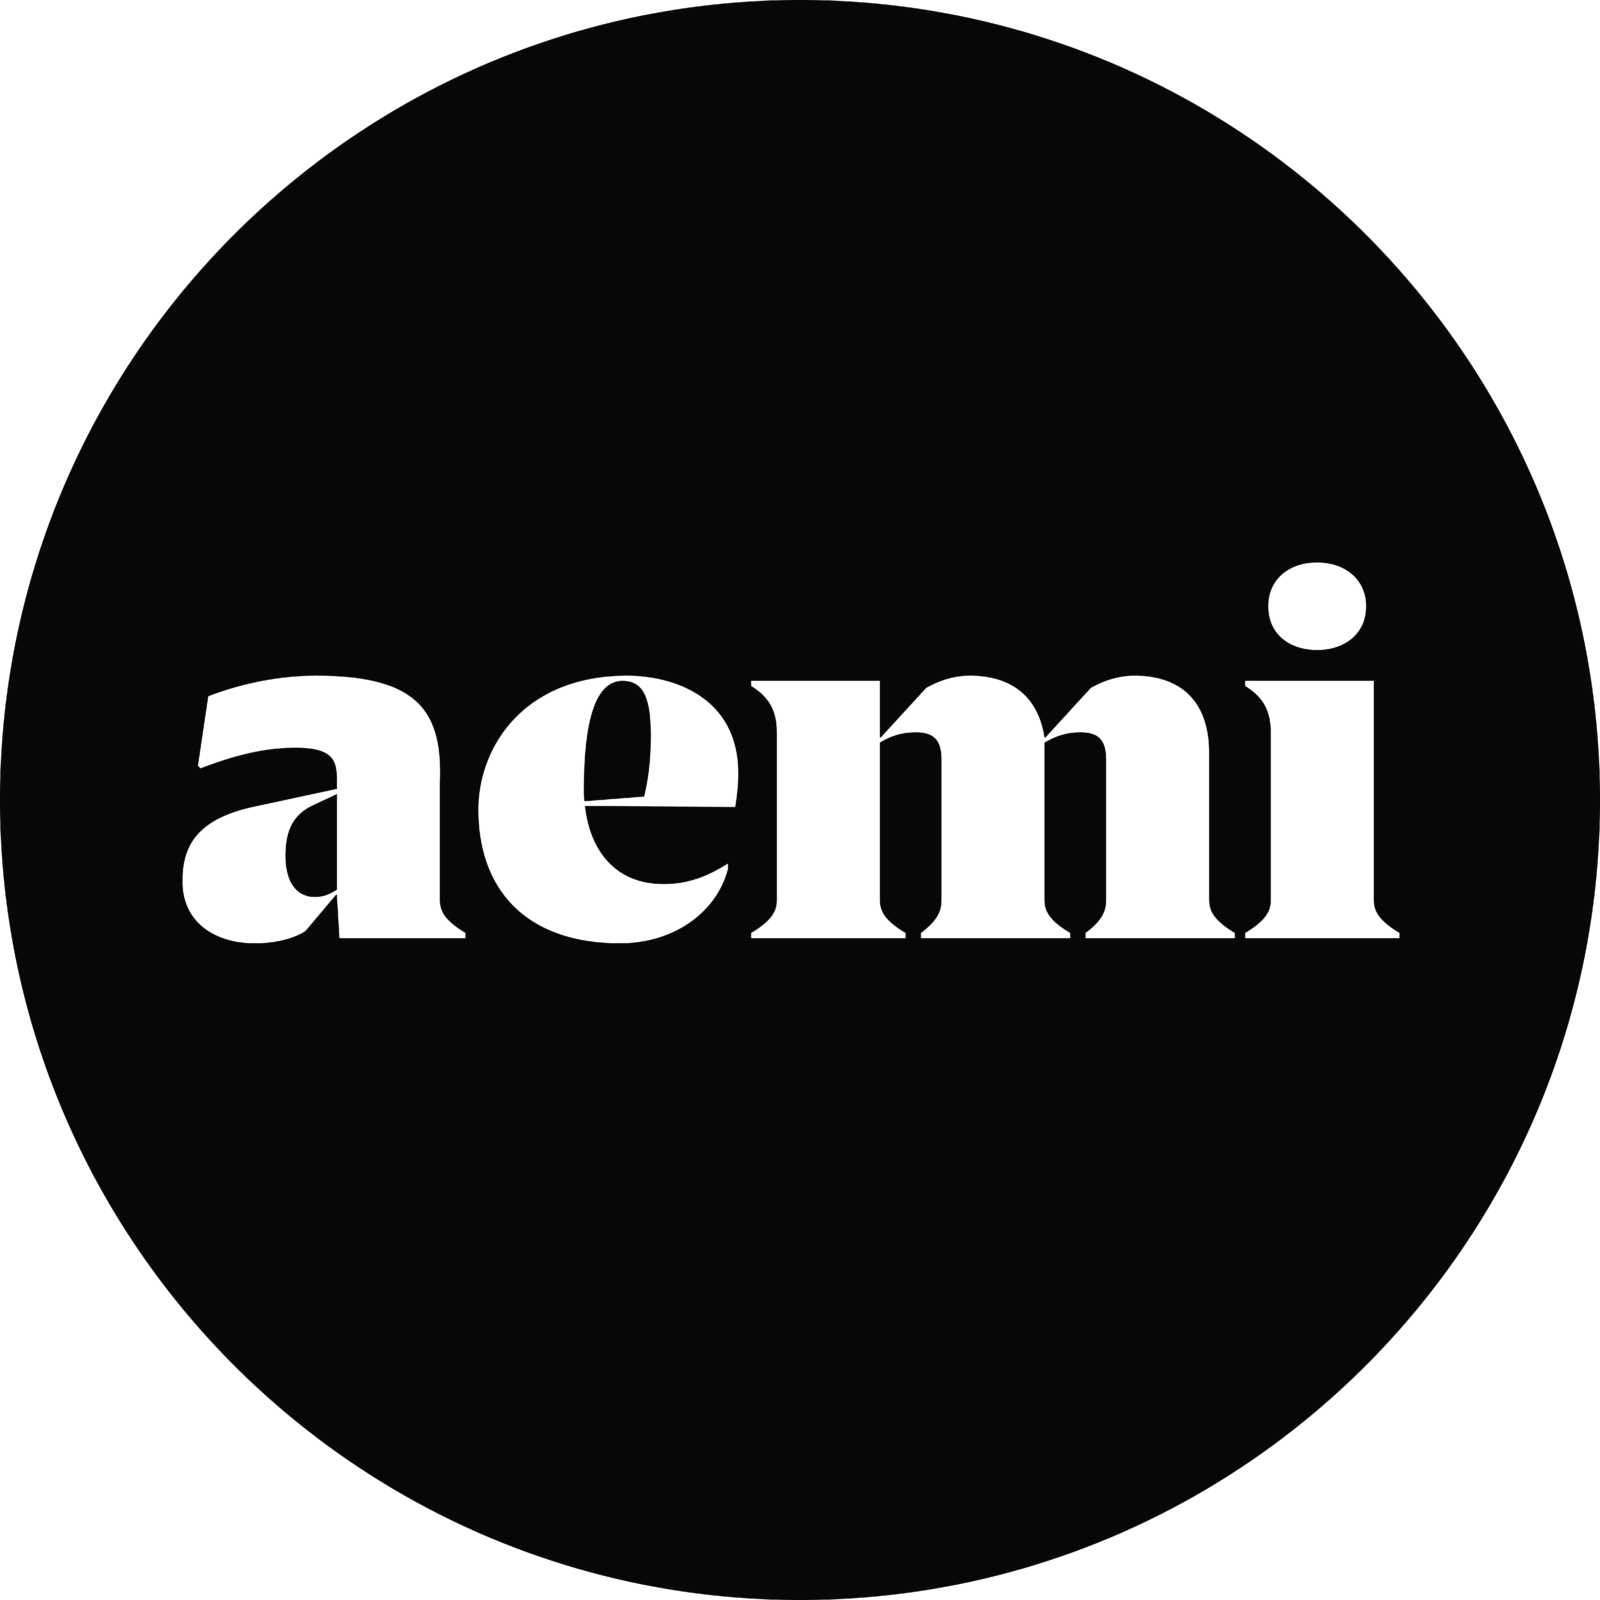 Logo for AEMI. This is a black circle with white text in the centre which reads AEMI.